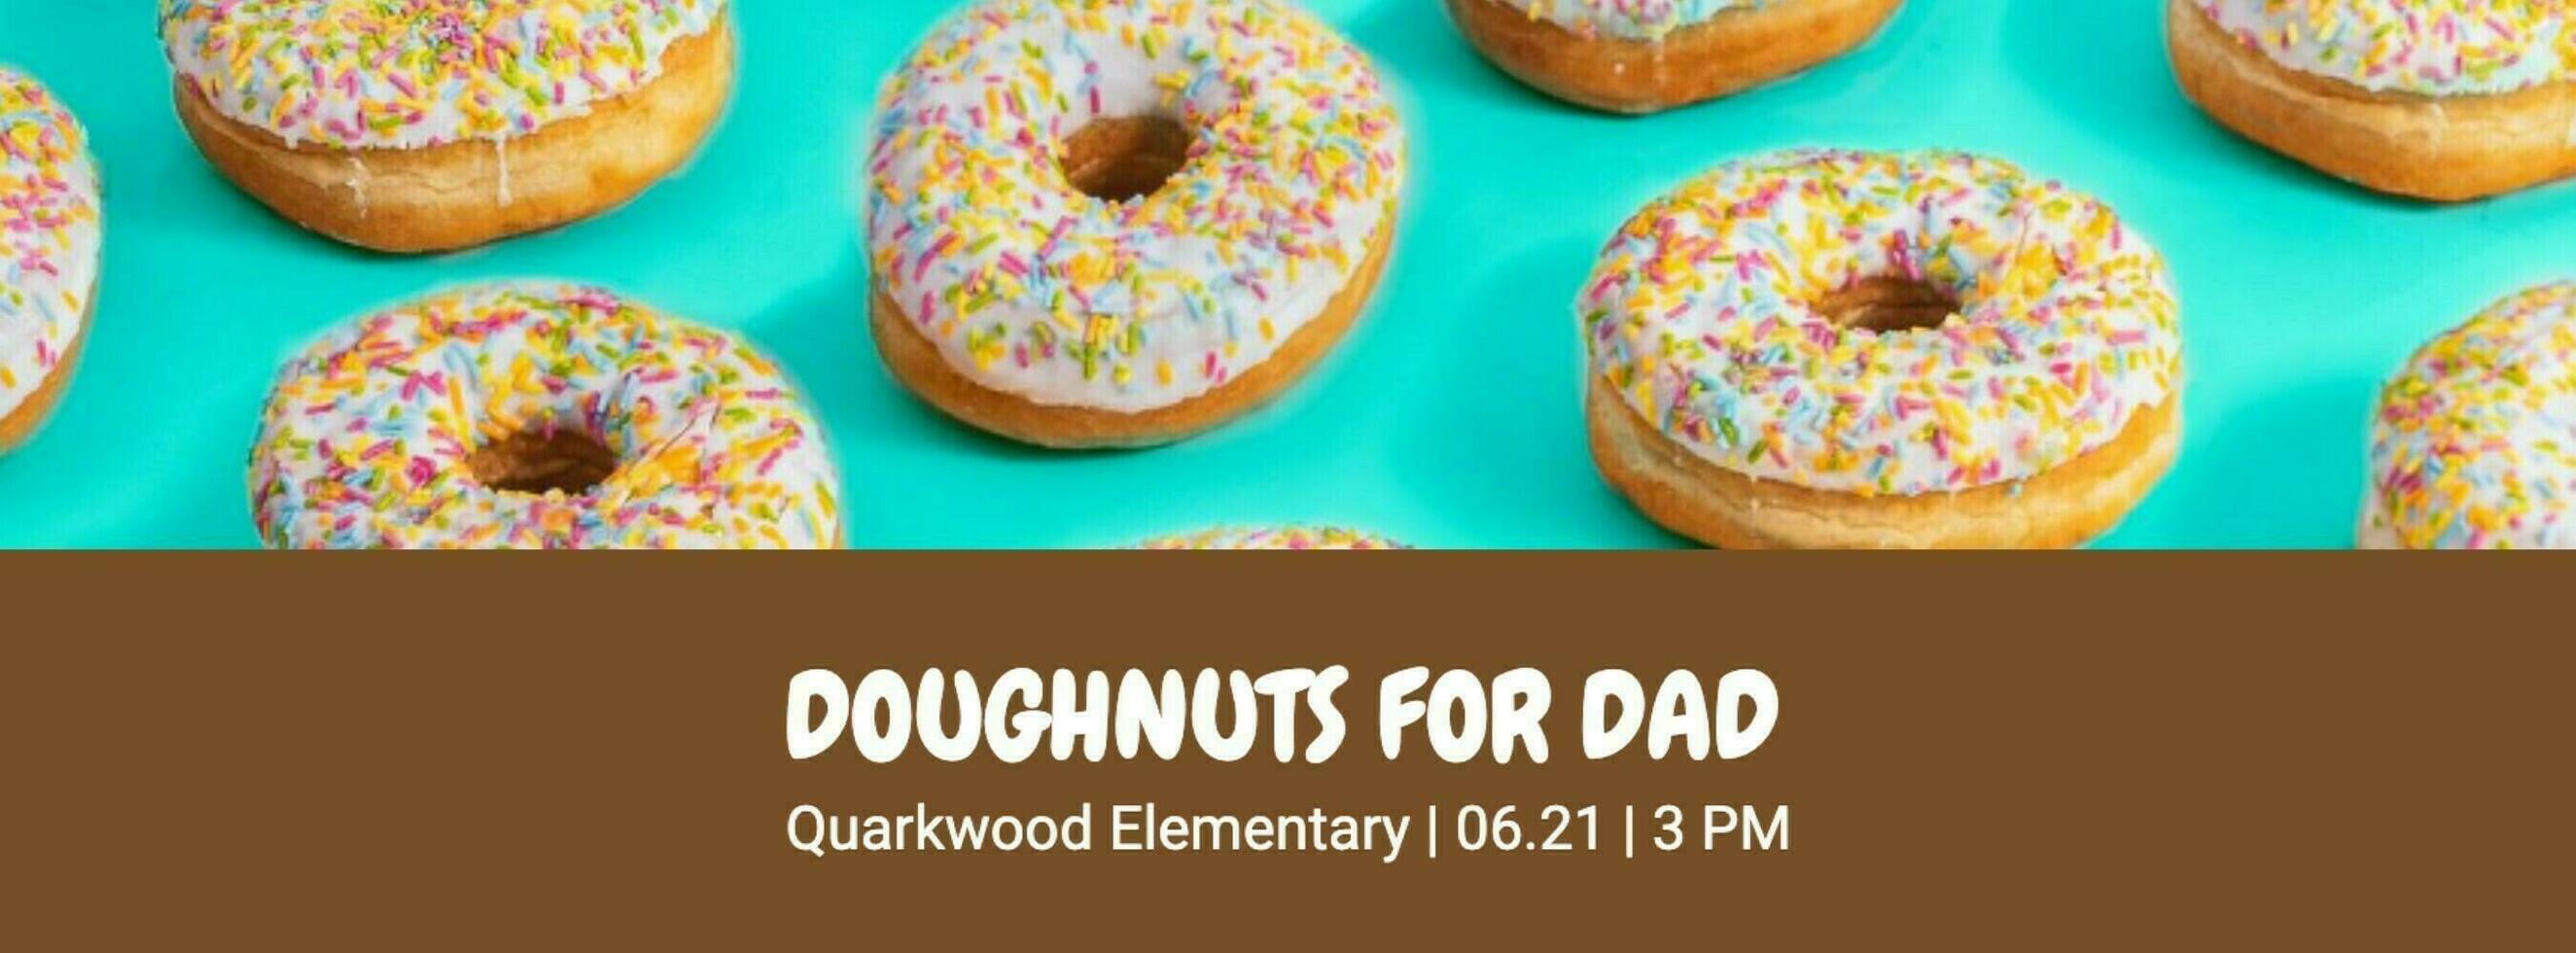 Doughnuts for Dad Promo template